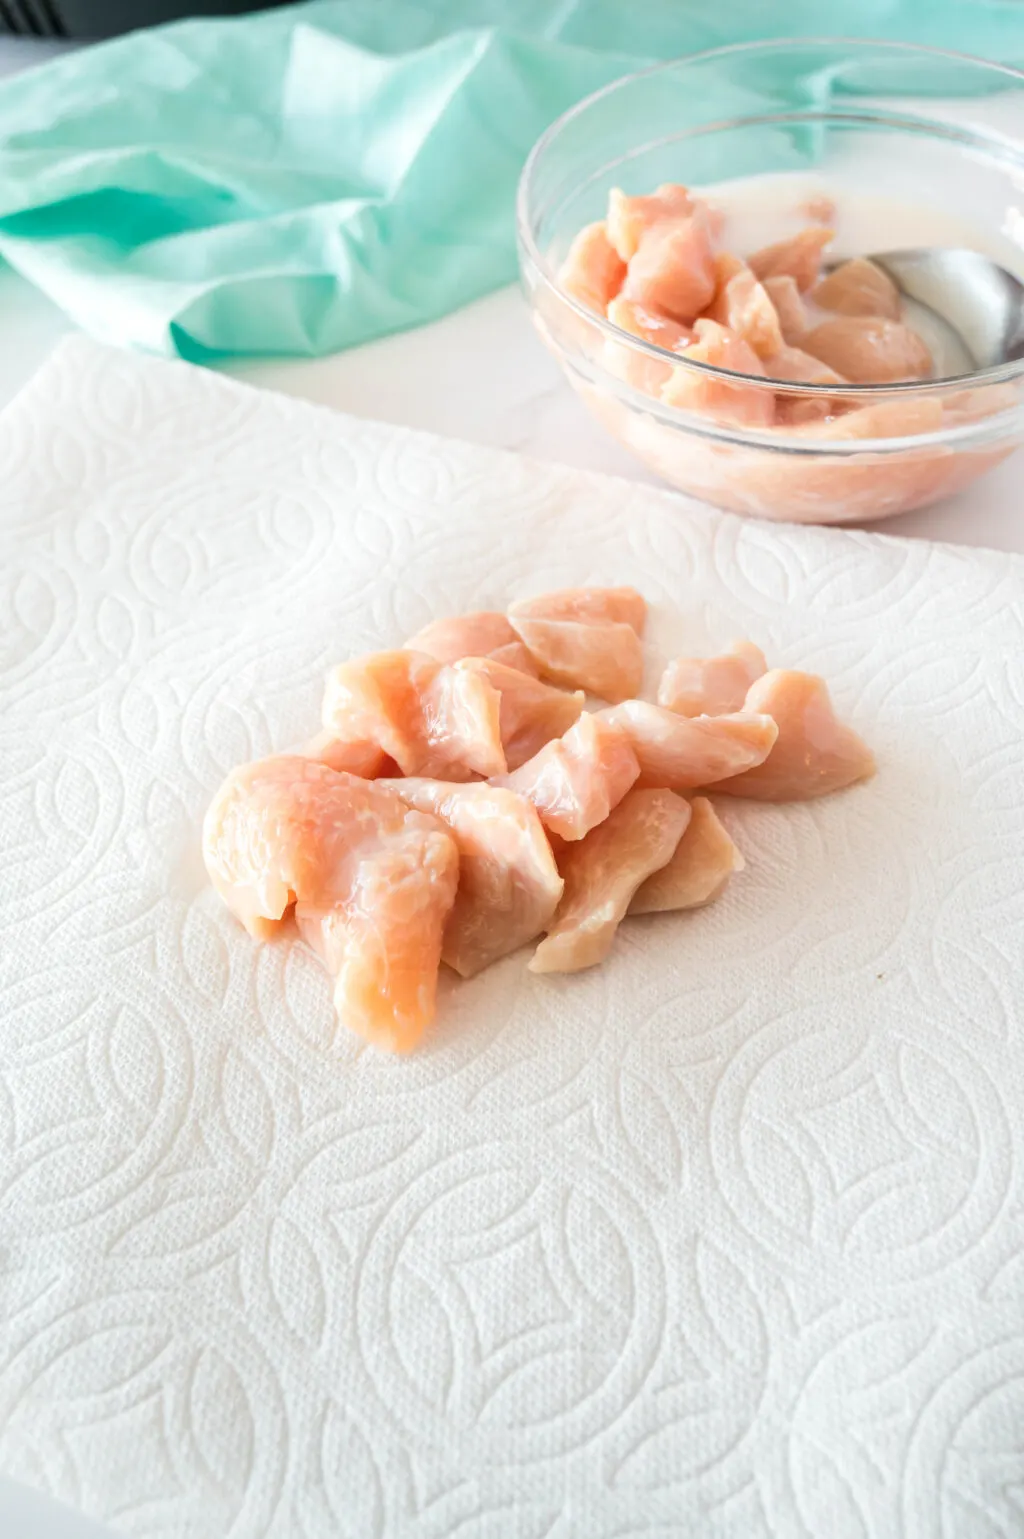 raw chicken pieces on a paper towel